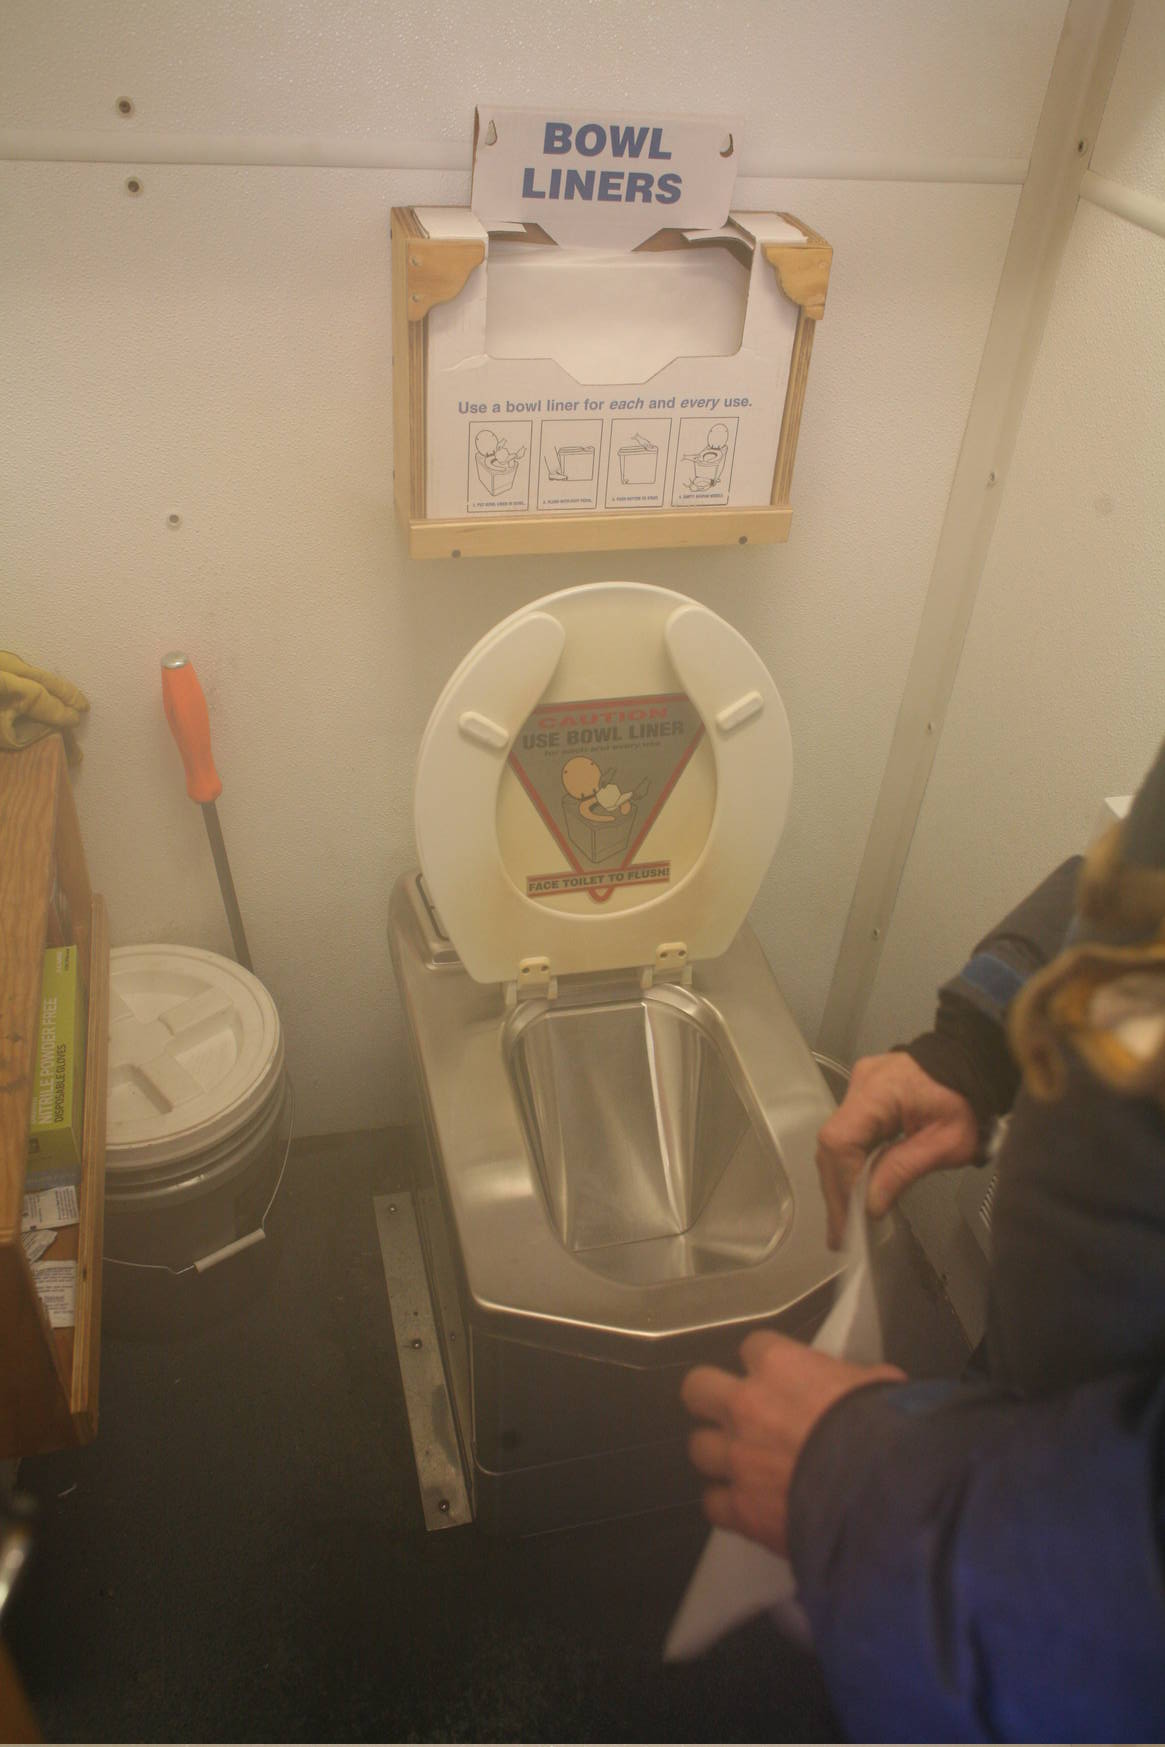 The traverse is equipped with kitchen, showers, and laundry machines. This picture shows an incinerator toilet that literally burns up human excrements in order to reduce waste.